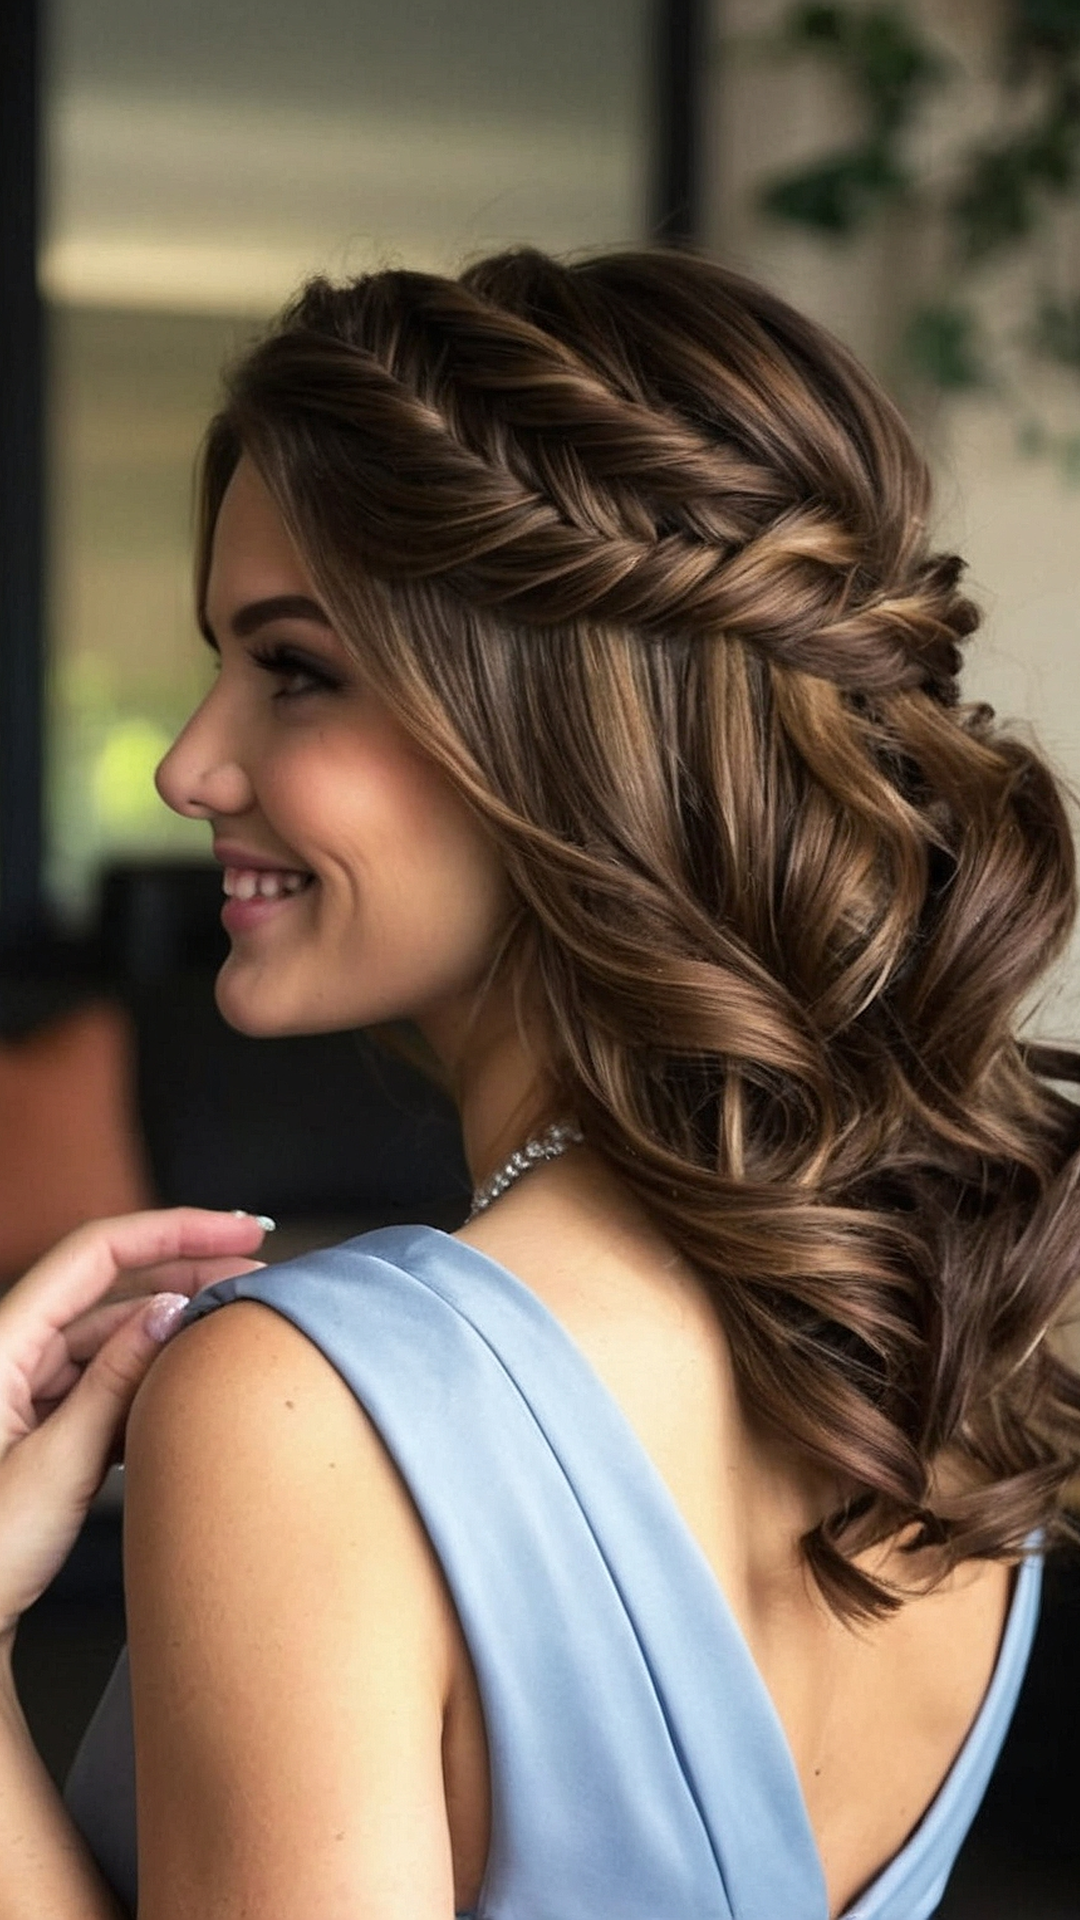 Bold Beauty: Unique Prom Hairstyles for Medium Length Hair